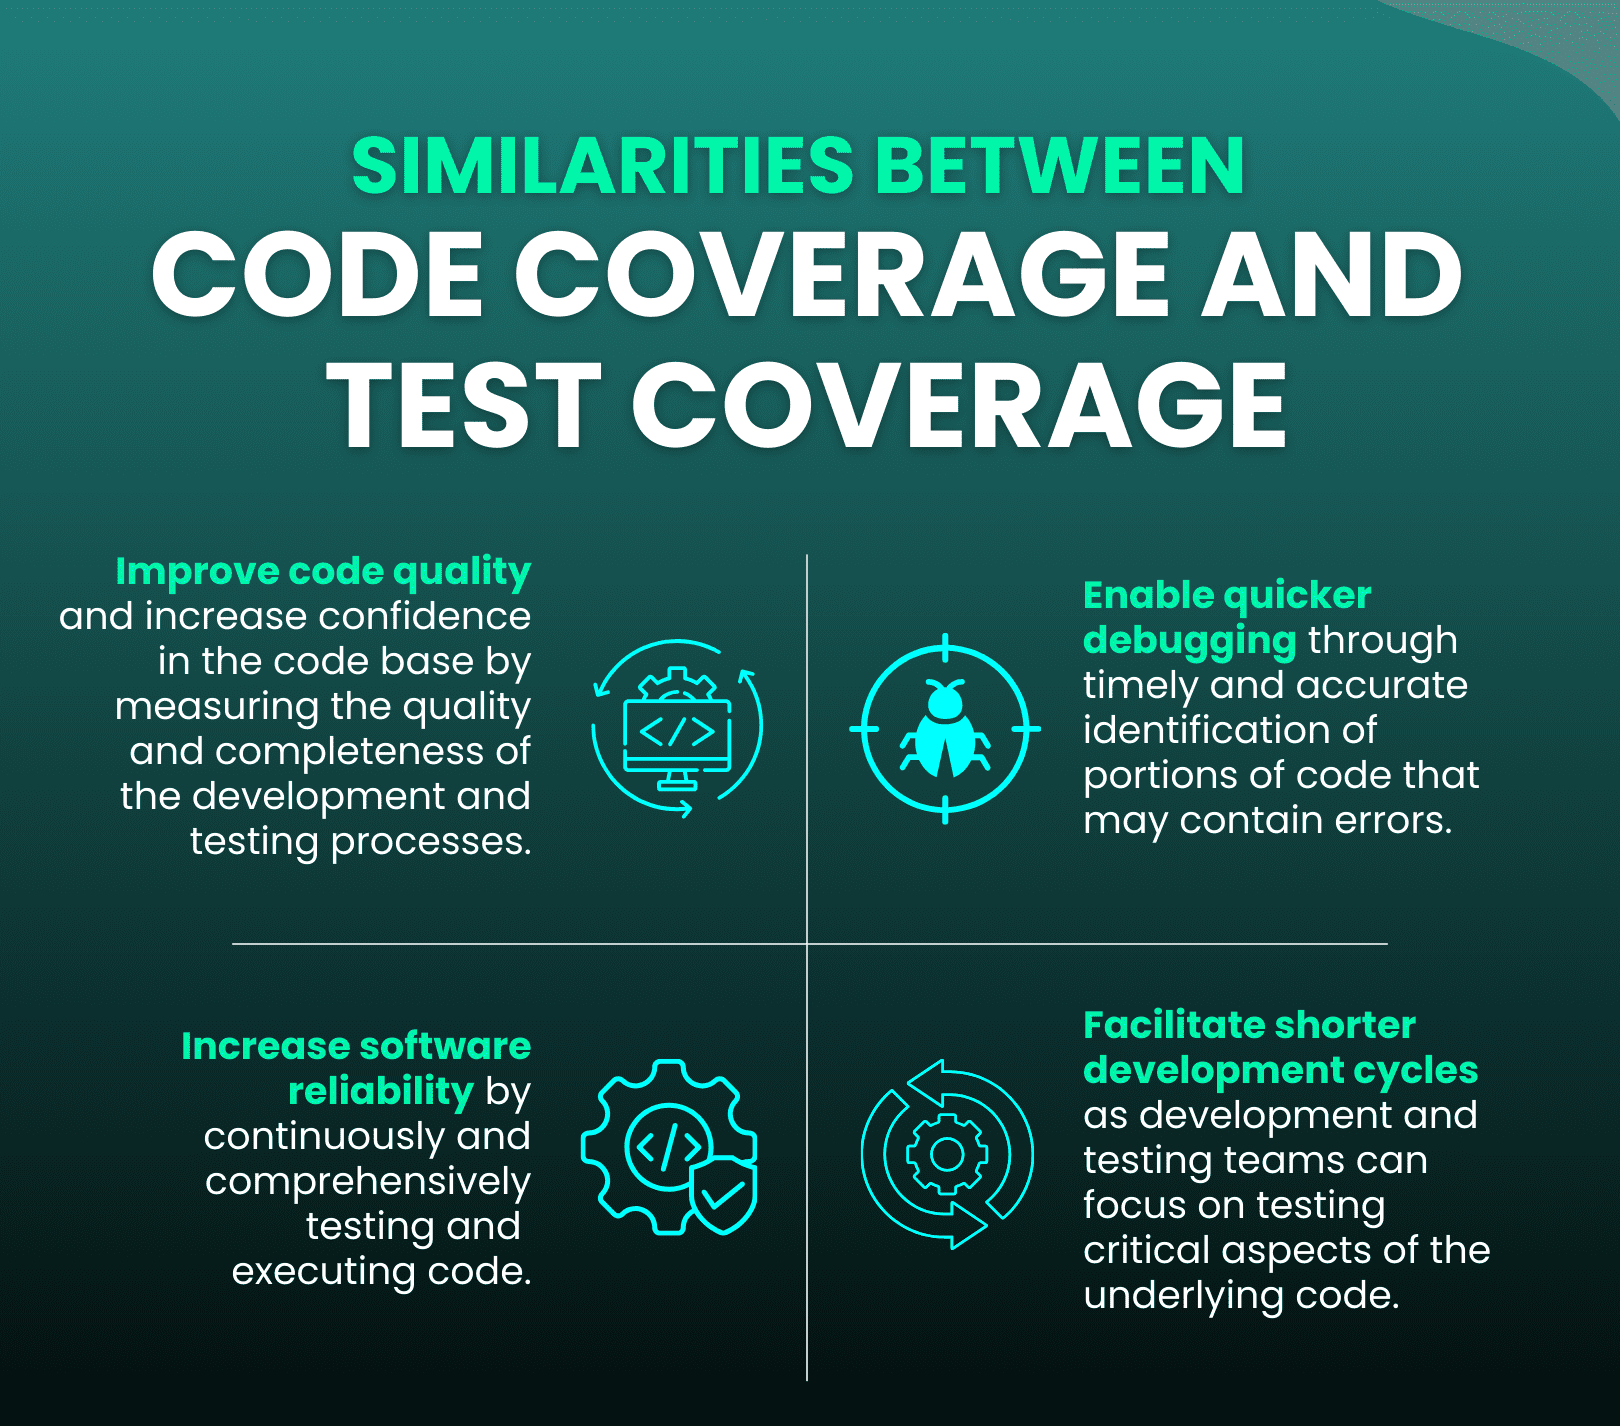 Similarities between Code Coverage and Test Coverage